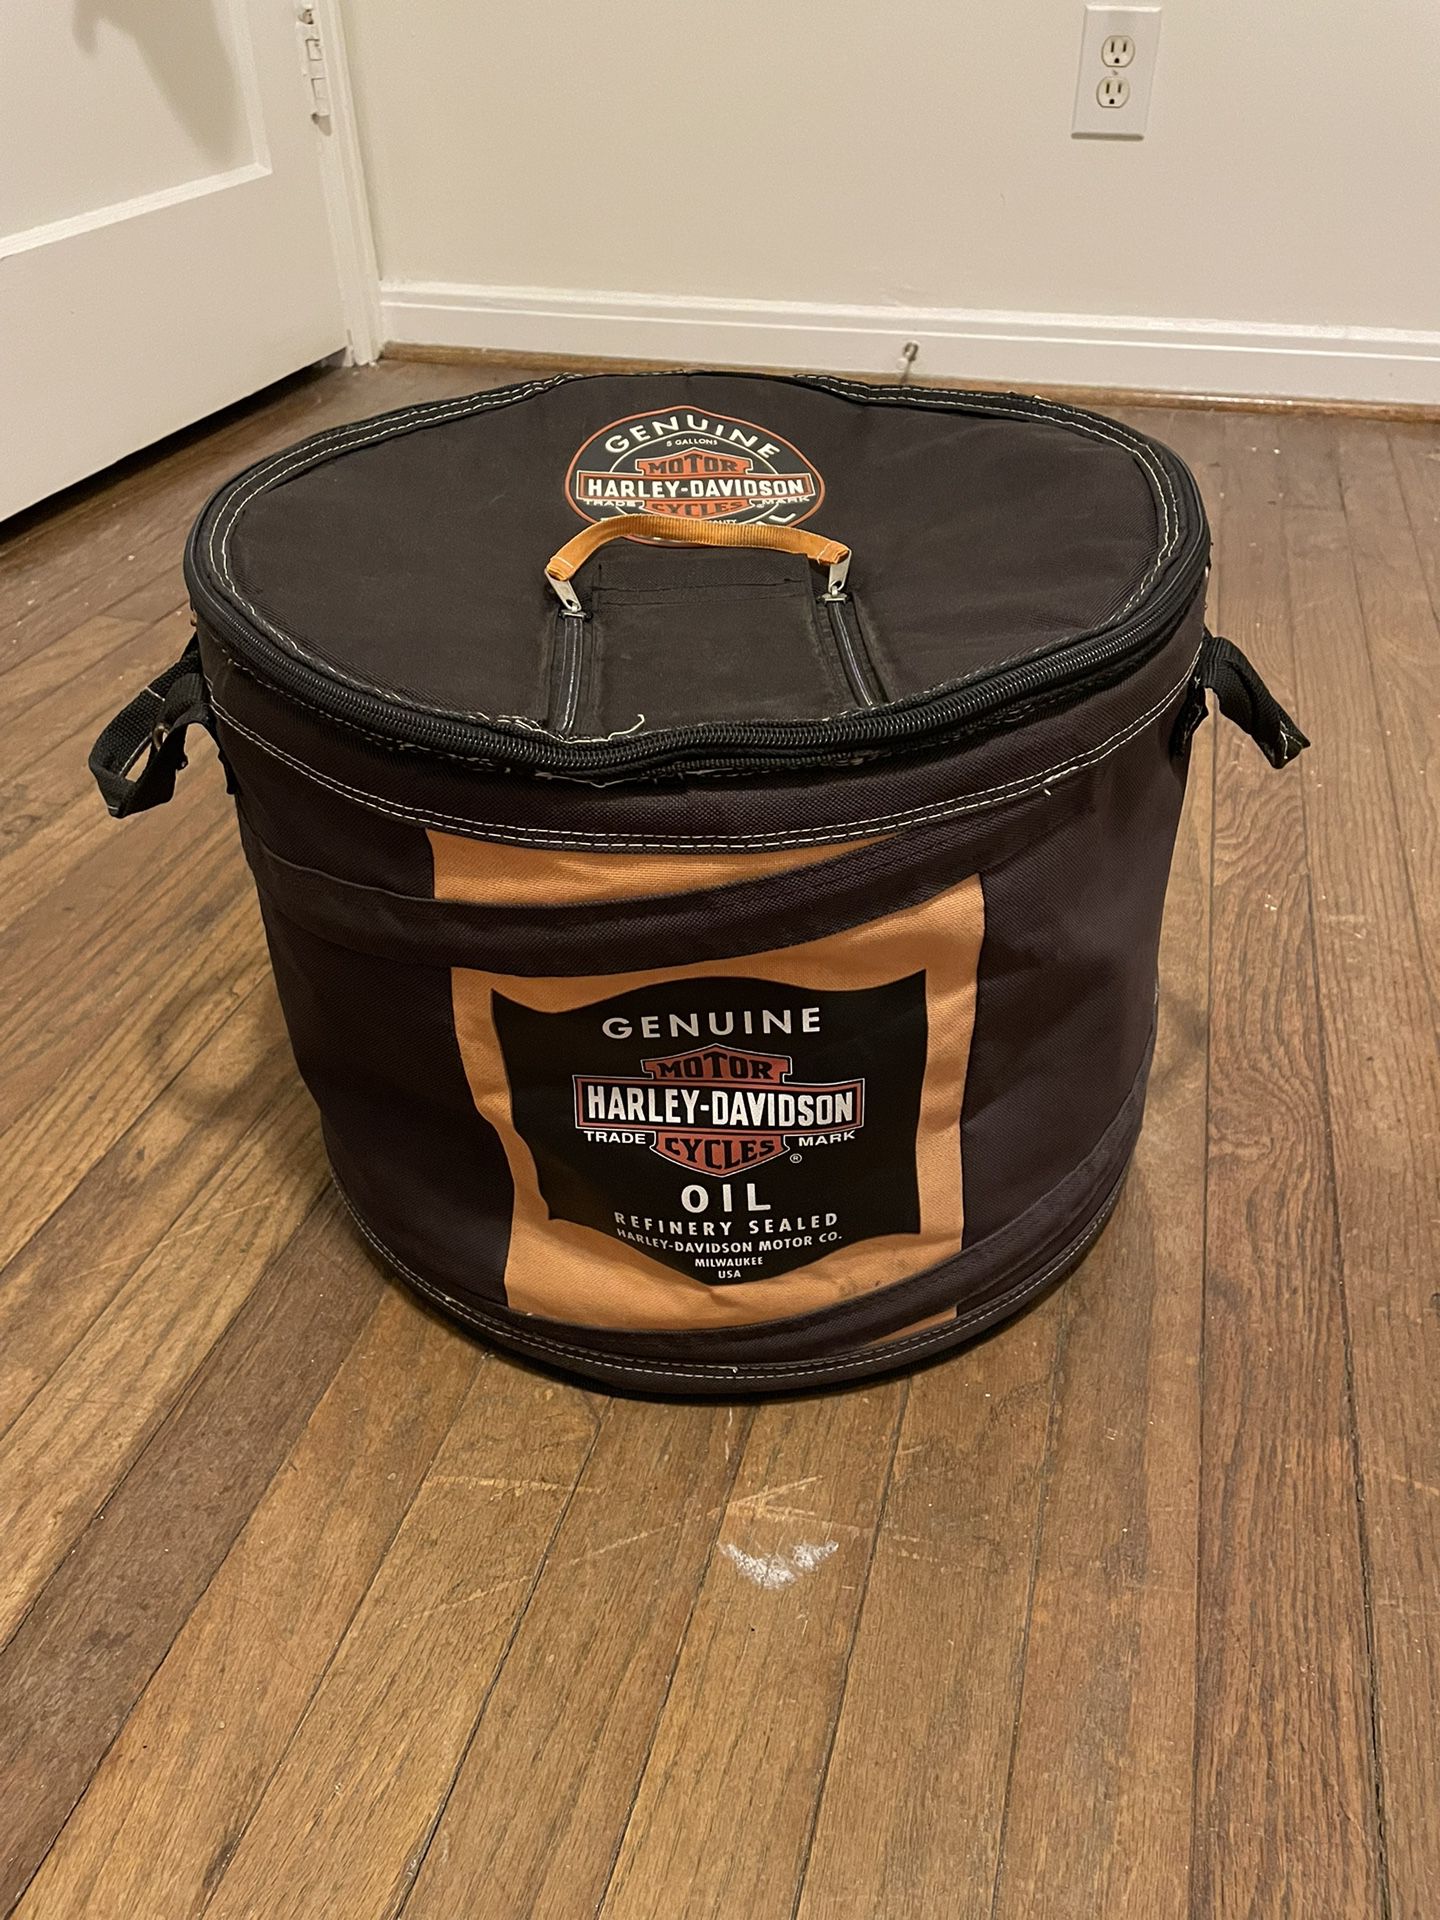 Harley Davidson Oil Can Inspired Collapsible Cooler